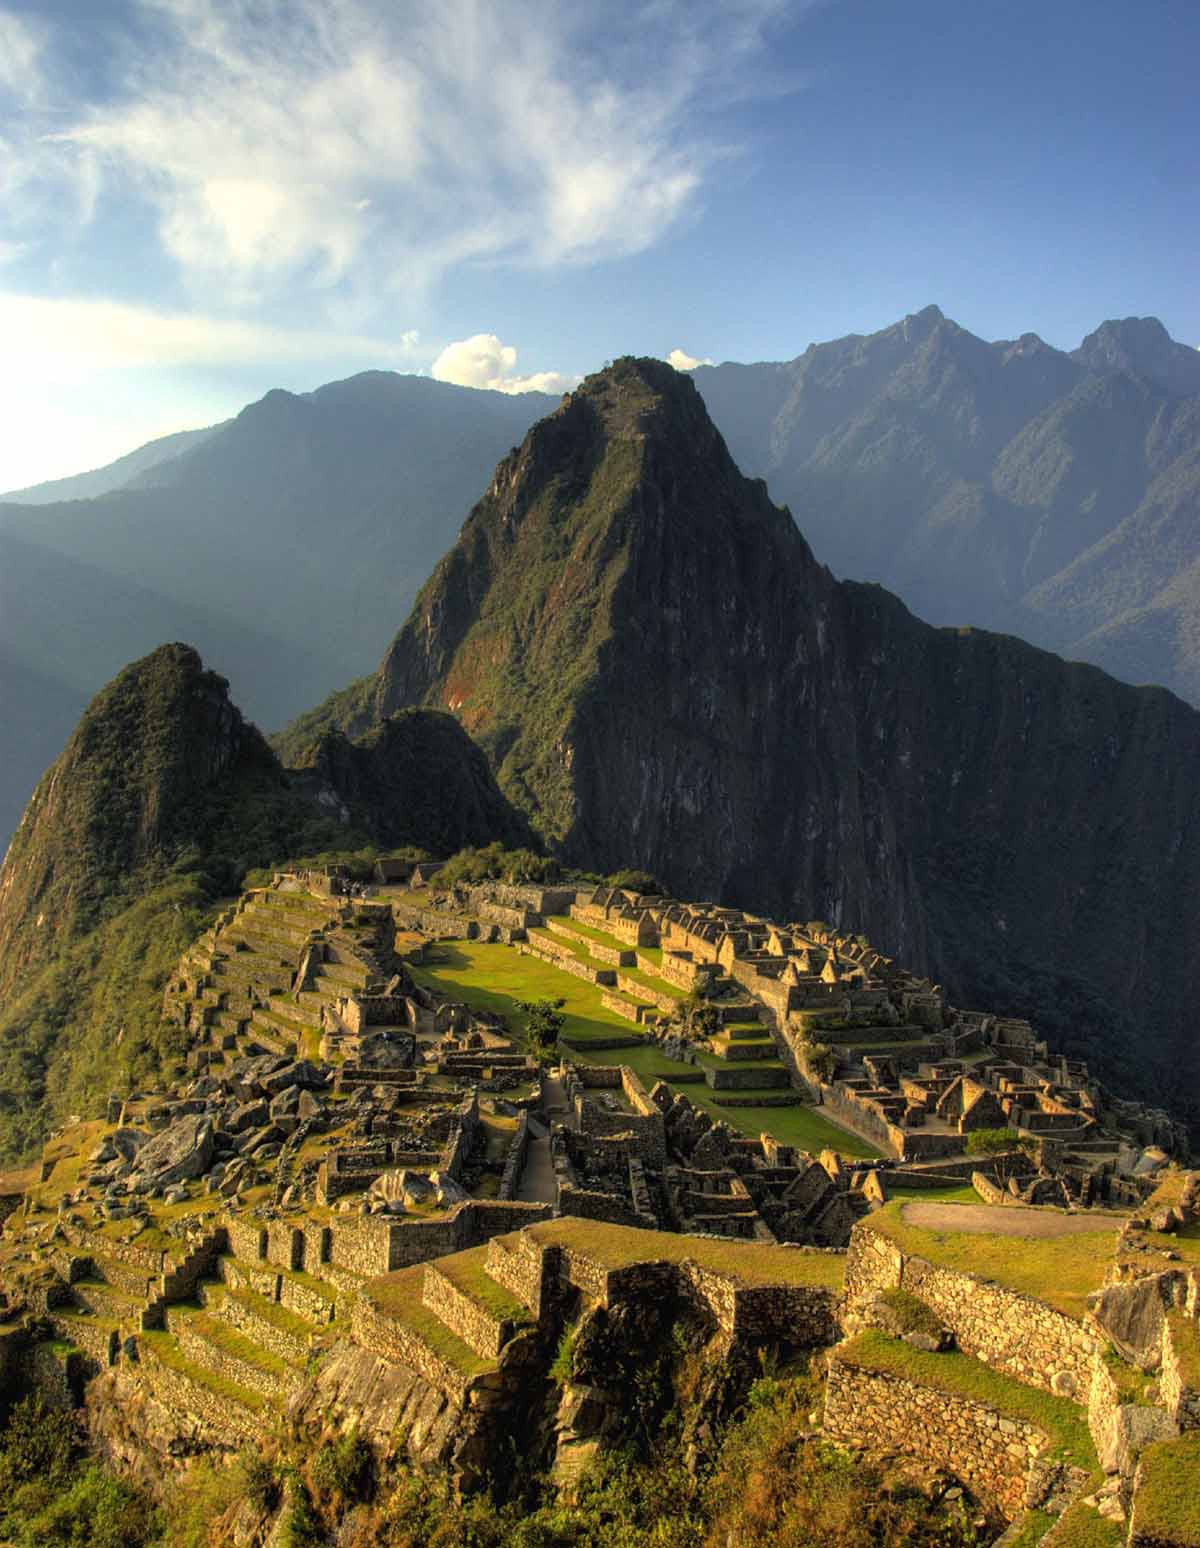 The Machu Picchu ruins appear warm and glowing at sunset. The mountain is partly in the shadow.